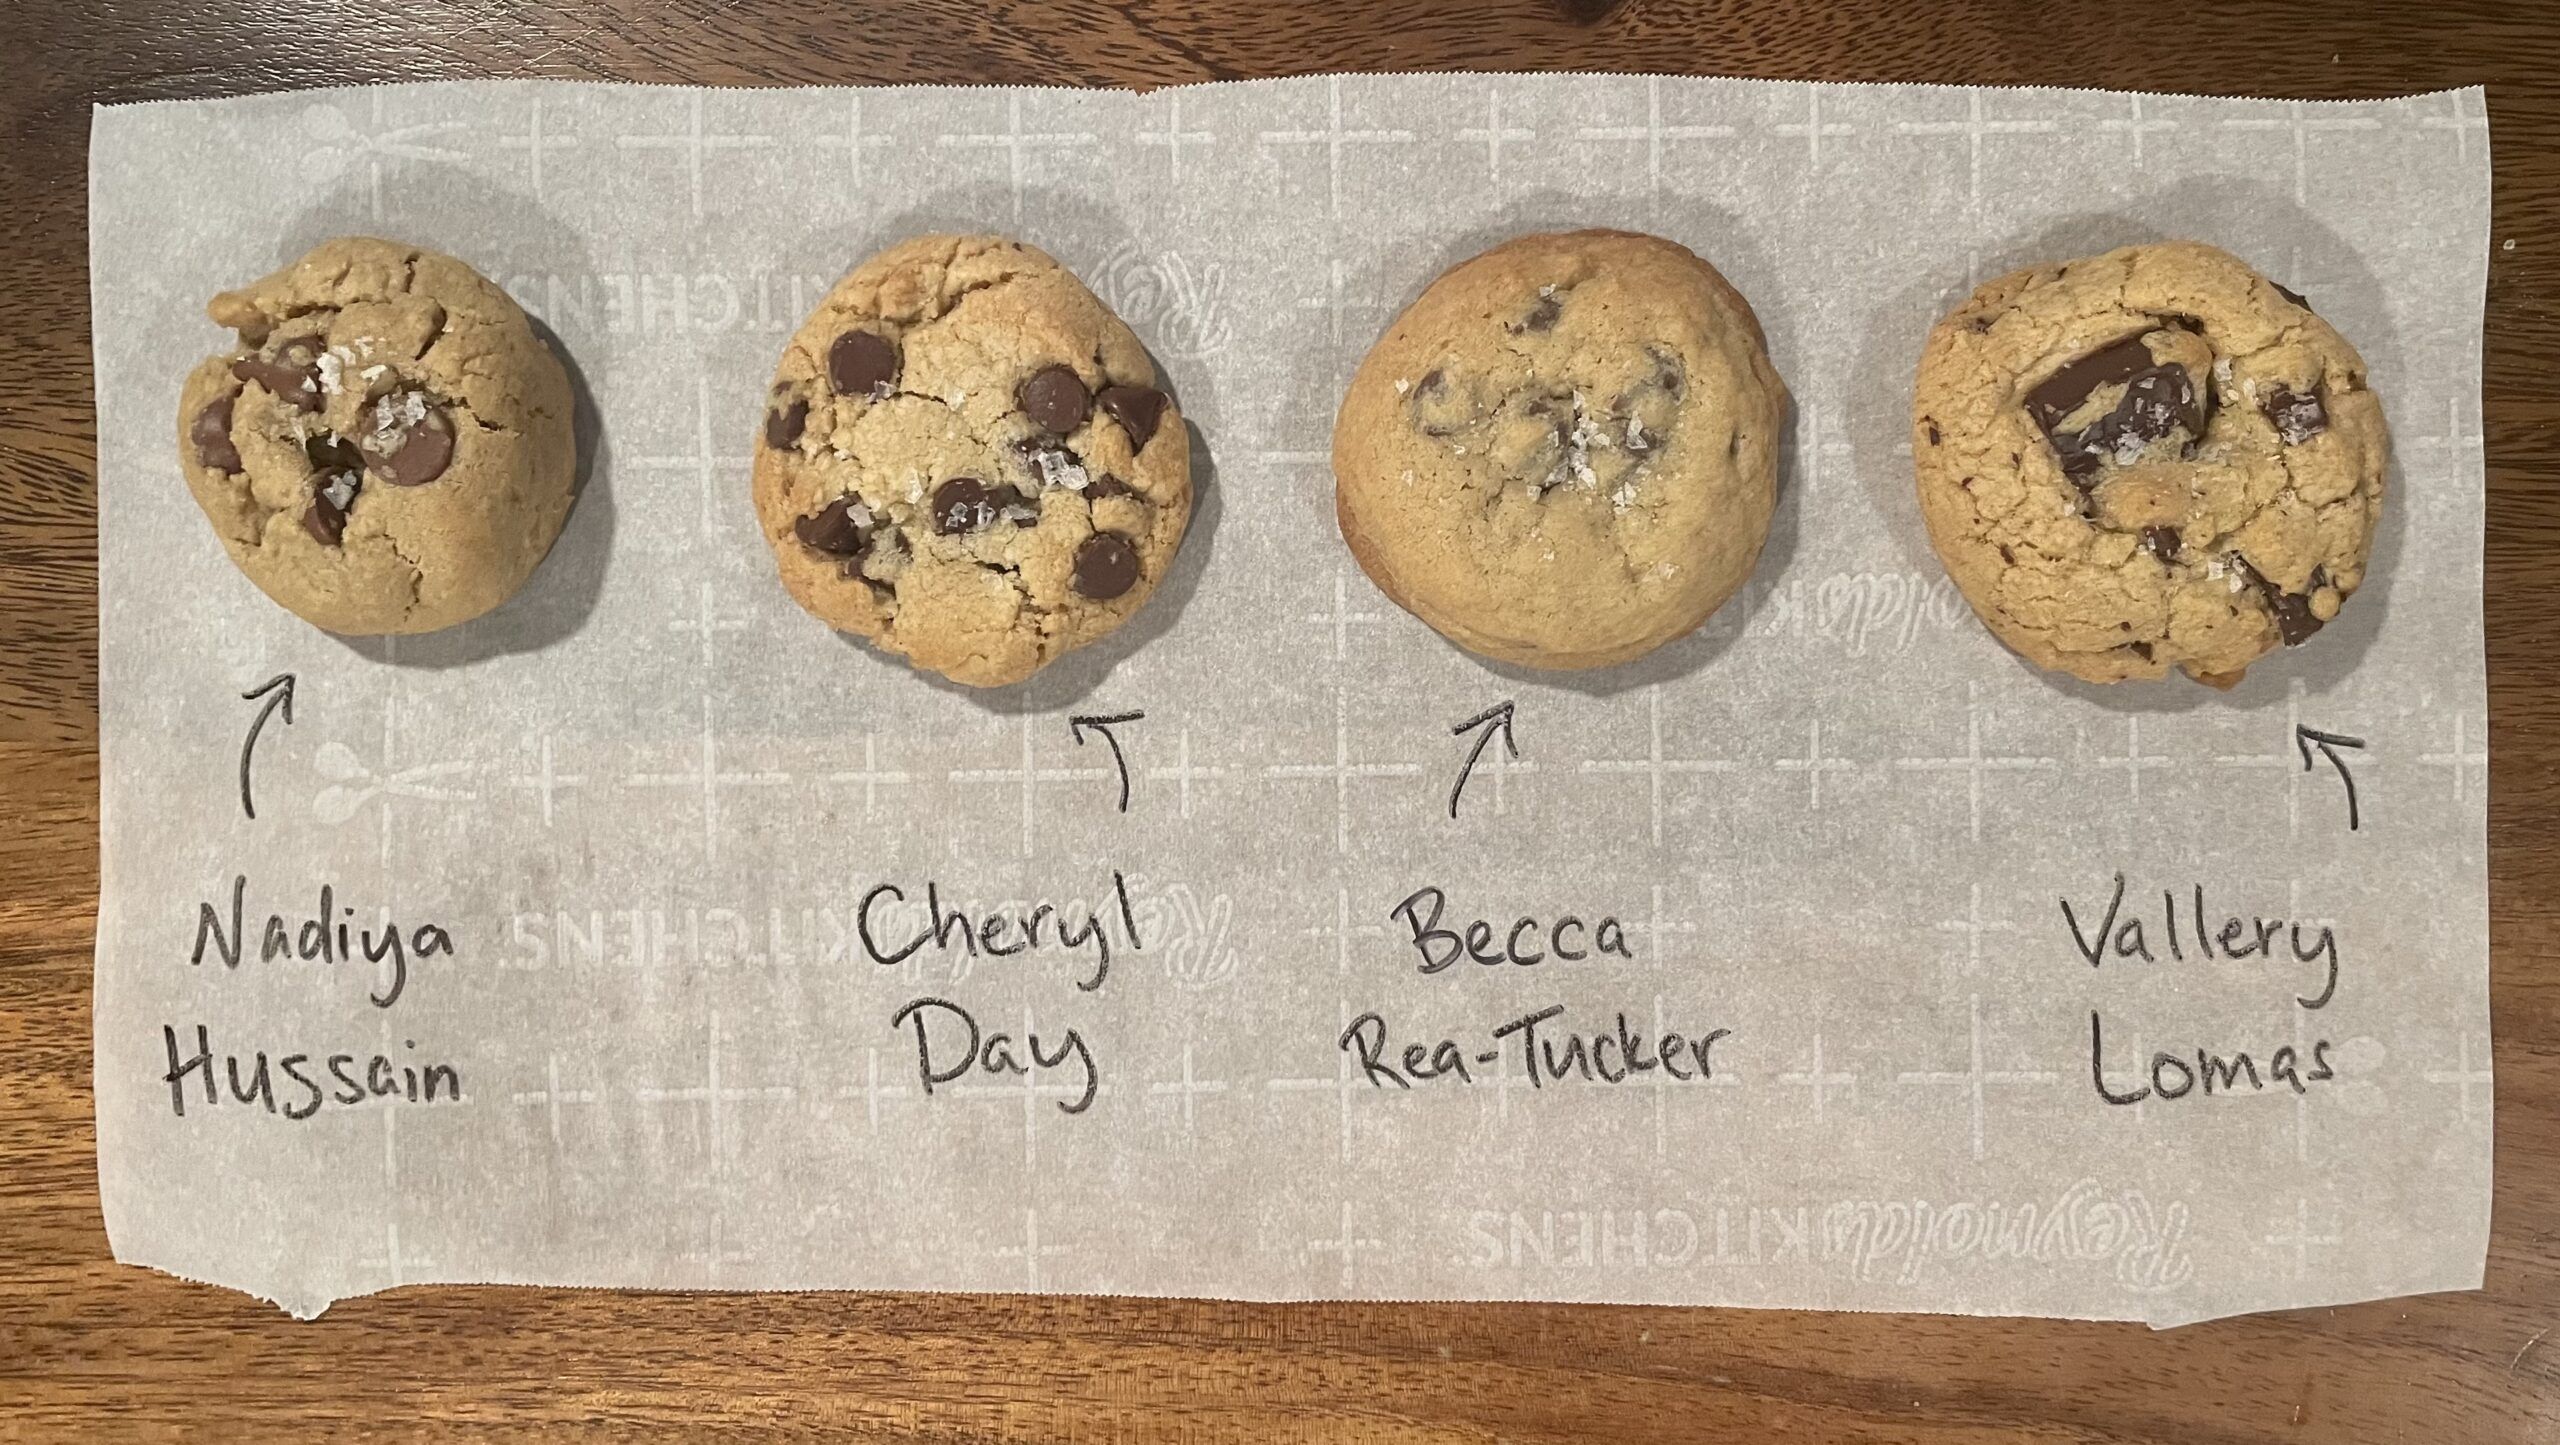 Four chocolate chip cookies are displayed on parchment paper. The first looks smaller with less chocolate, the second has a hearty sprinkle of salt, the third looks fluffier with less chocolate, and the fourth has big chocolate chunks.